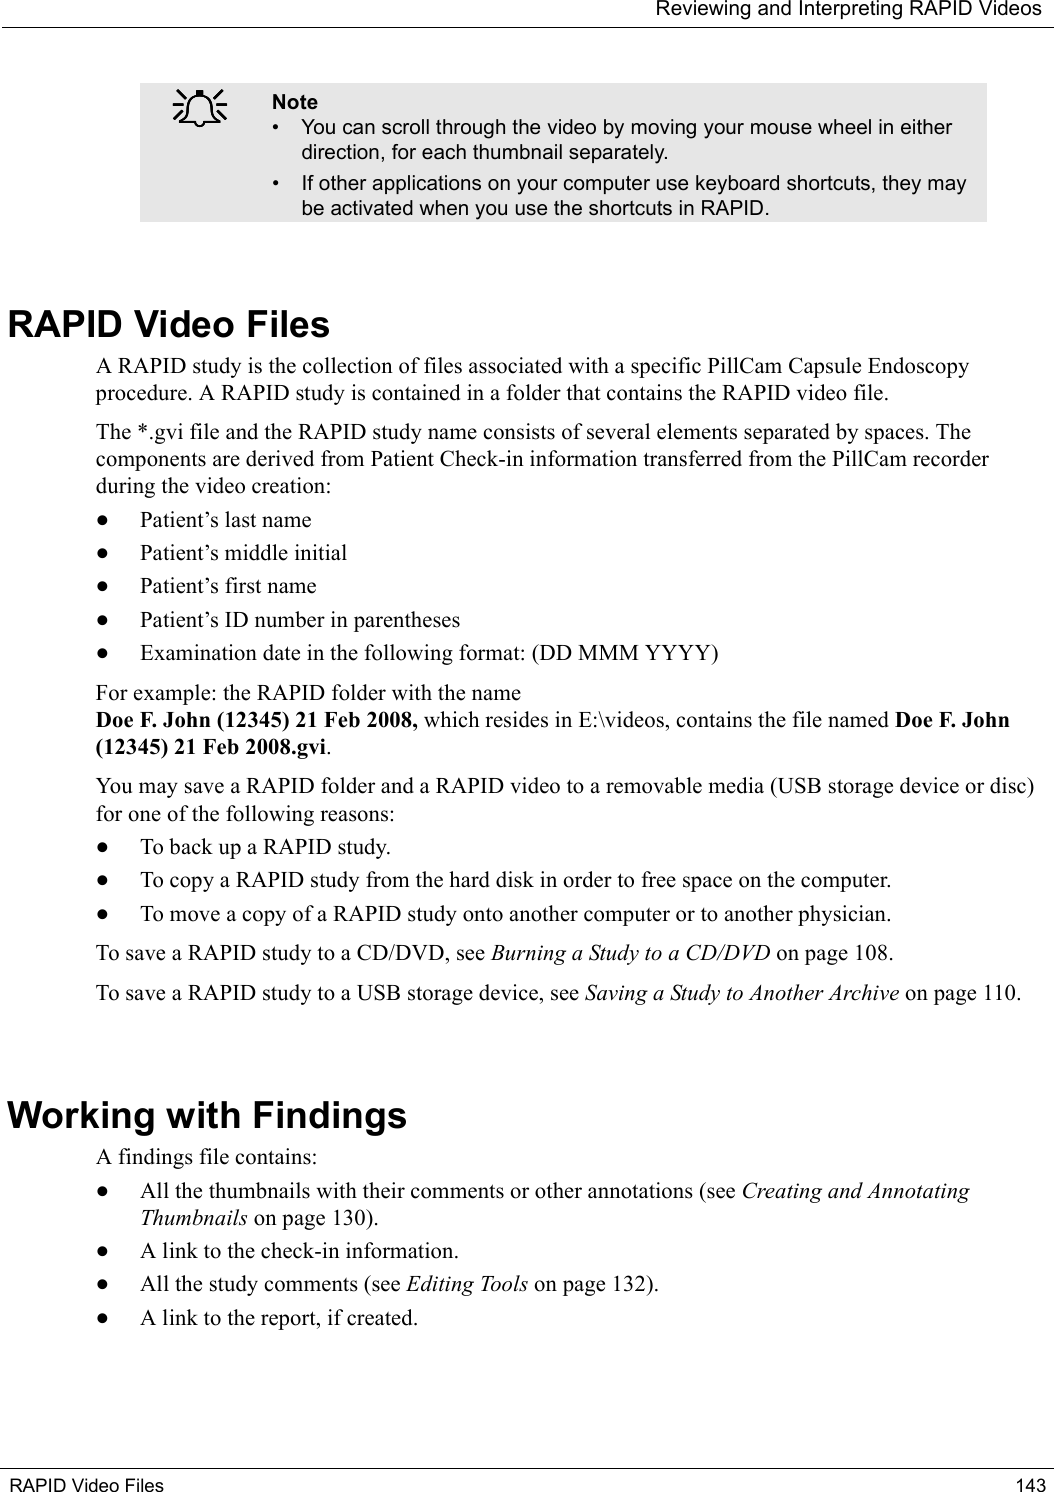 Reviewing and Interpreting RAPID VideosRAPID Video Files 143RAPID Video FilesA RAPID study is the collection of files associated with a specific PillCam Capsule Endoscopy procedure. A RAPID study is contained in a folder that contains the RAPID video file. The *.gvi file and the RAPID study name consists of several elements separated by spaces. The components are derived from Patient Check-in information transferred from the PillCam recorder during the video creation:•Patient’s last name•Patient’s middle initial•Patient’s first name•Patient’s ID number in parentheses•Examination date in the following format: (DD MMM YYYY)For example: the RAPID folder with the name Doe F. John (12345) 21 Feb 2008, which resides in E:\videos, contains the file named Doe F. John (12345) 21 Feb 2008.gvi. You may save a RAPID folder and a RAPID video to a removable media (USB storage device or disc) for one of the following reasons:•To back up a RAPID study.•To copy a RAPID study from the hard disk in order to free space on the computer.•To move a copy of a RAPID study onto another computer or to another physician.To save a RAPID study to a CD/DVD, see Burning a Study to a CD/DVD on page 108.To save a RAPID study to a USB storage device, see Saving a Study to Another Archive on page 110.Working with FindingsA findings file contains:•All the thumbnails with their comments or other annotations (see Creating and Annotating Thumbnails on page 130).•A link to the check-in information.•All the study comments (see Editing Tools on page 132).•A link to the report, if created.֠֠֠֠Note• You can scroll through the video by moving your mouse wheel in either direction, for each thumbnail separately. • If other applications on your computer use keyboard shortcuts, they may be activated when you use the shortcuts in RAPID.